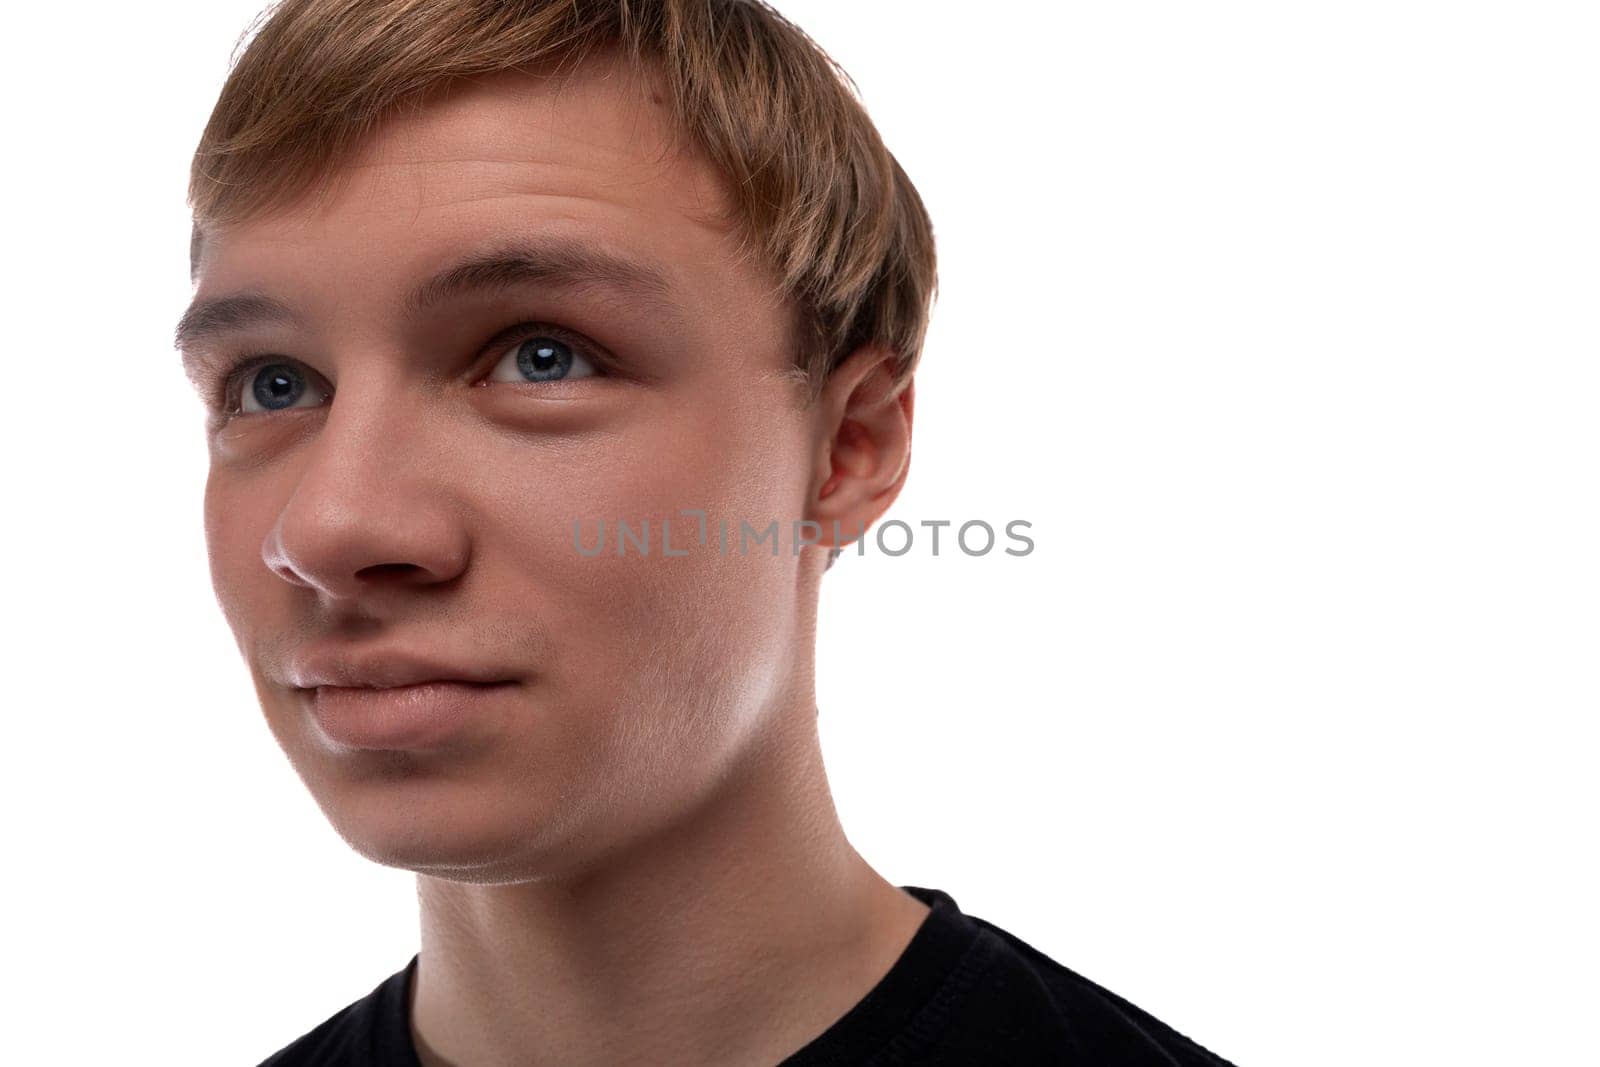 Headshot portrait of a blond teenager young man with short hair.